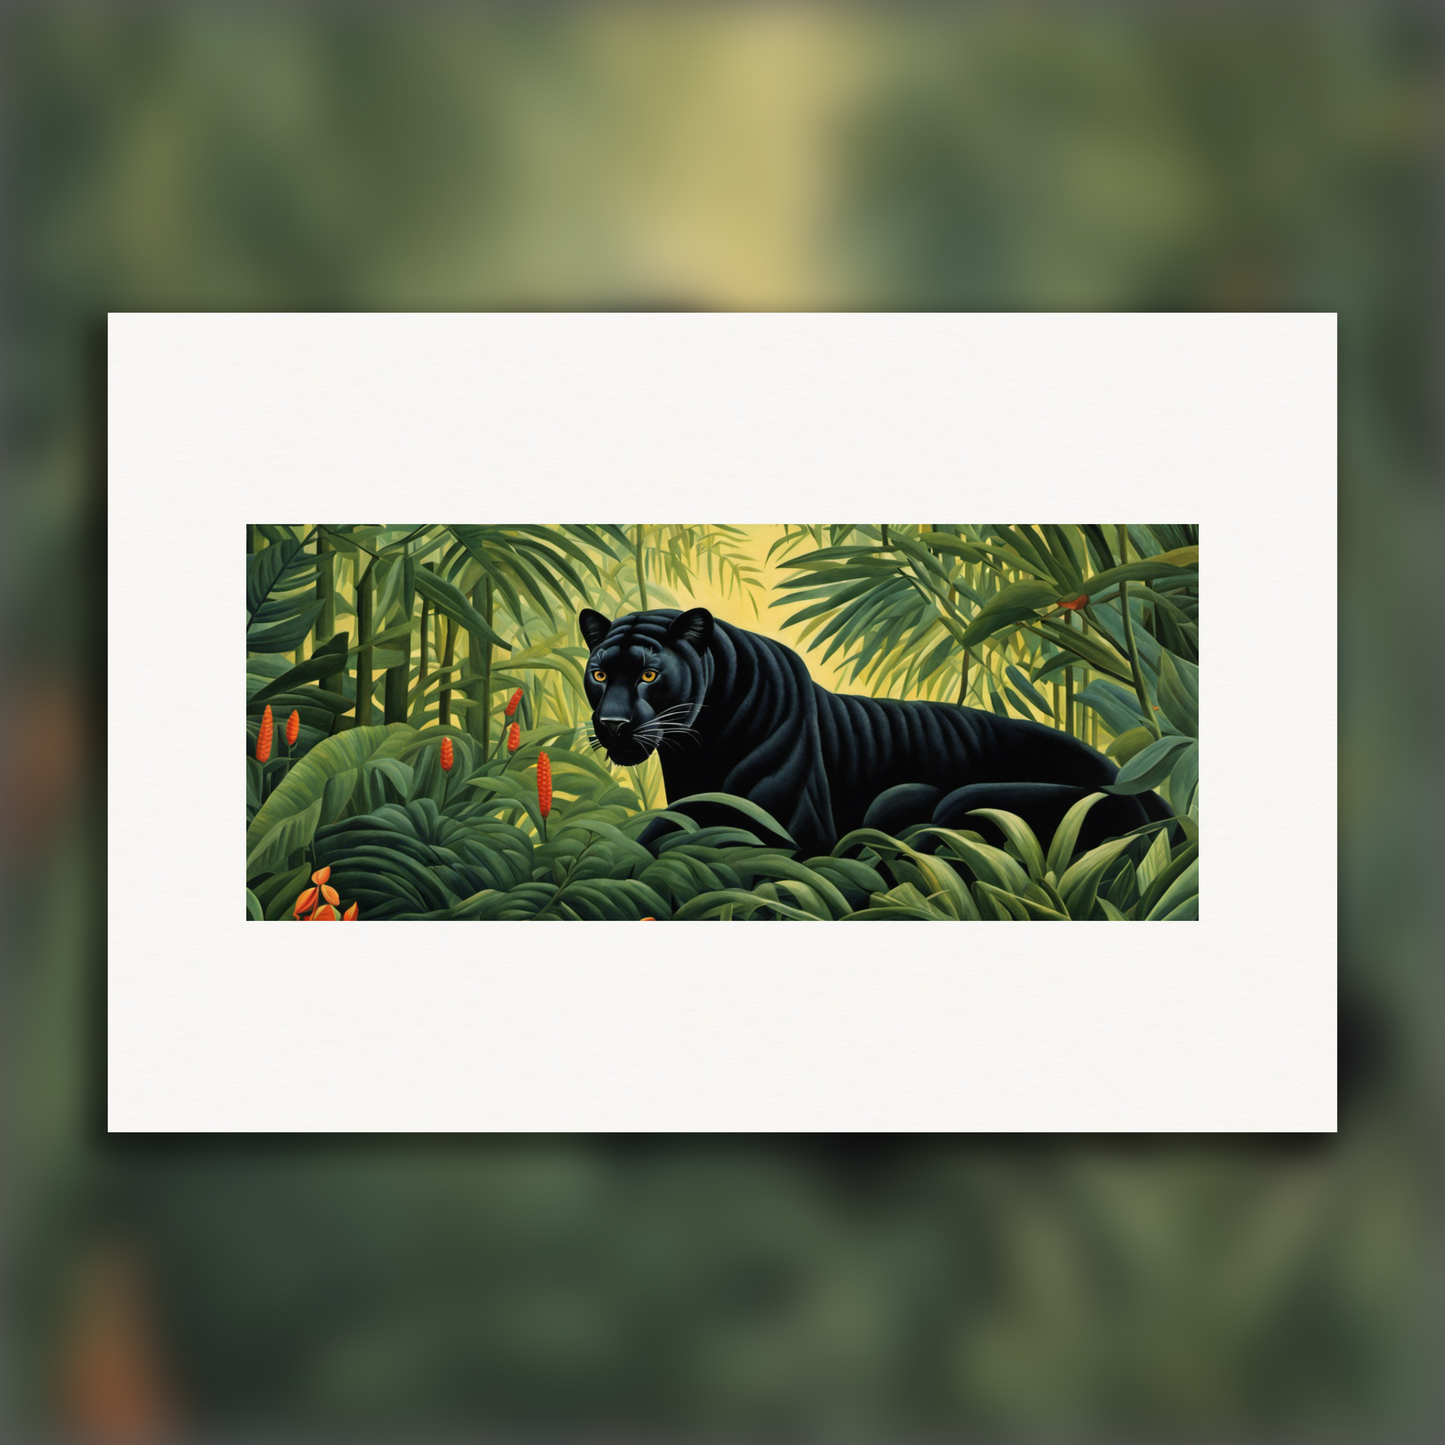 Poster - Henri Rousseau, close-up of a black panther animal in the jungle - 1395439332